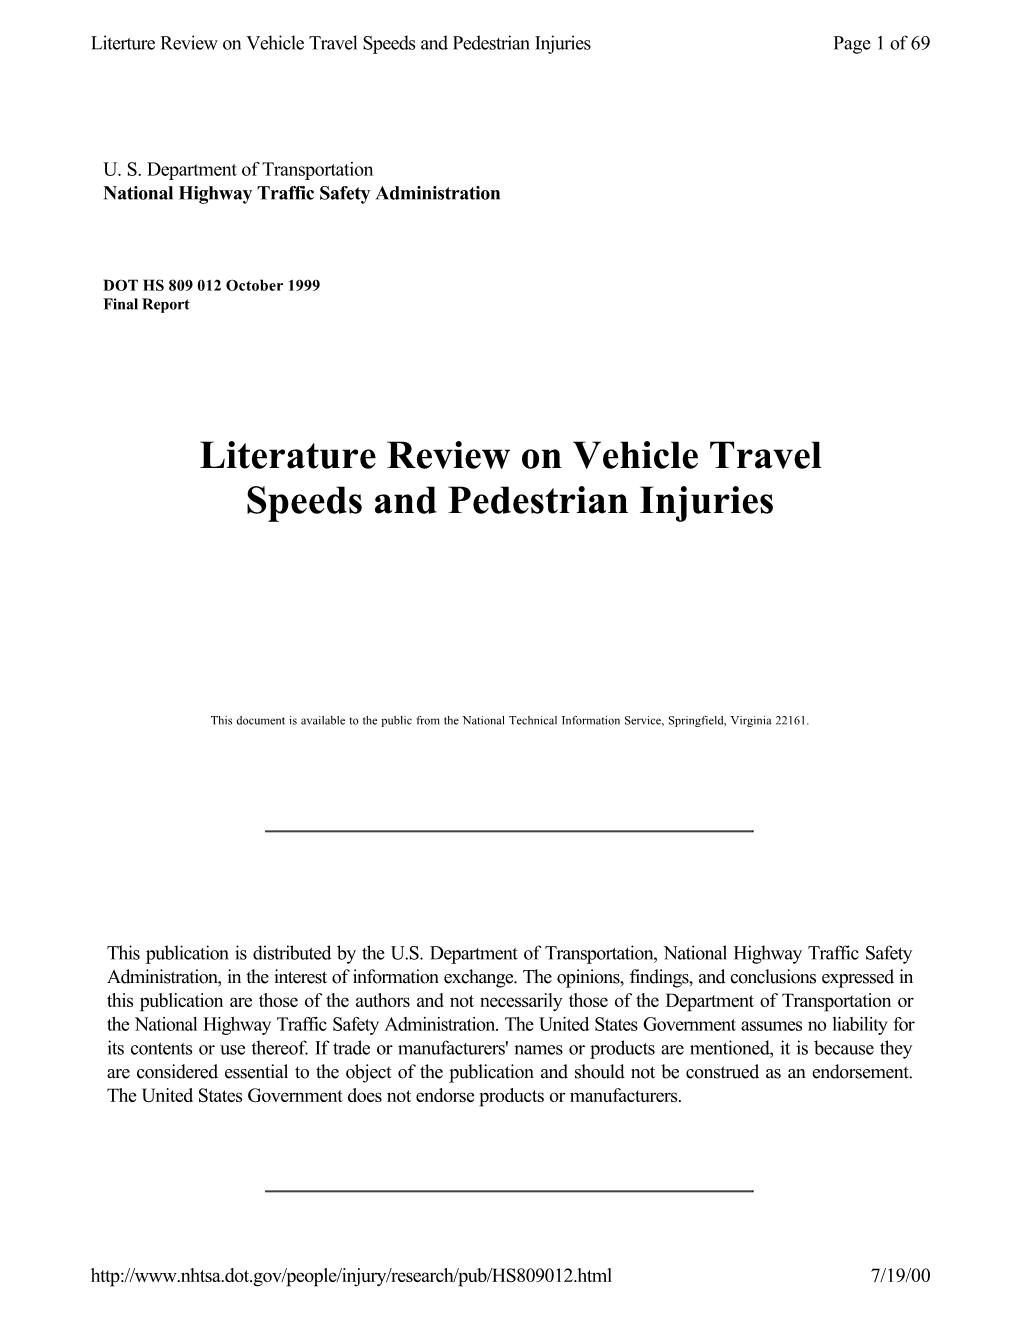 Literature Review on Vehicle Travel Speeds and Pedestrian Injuries